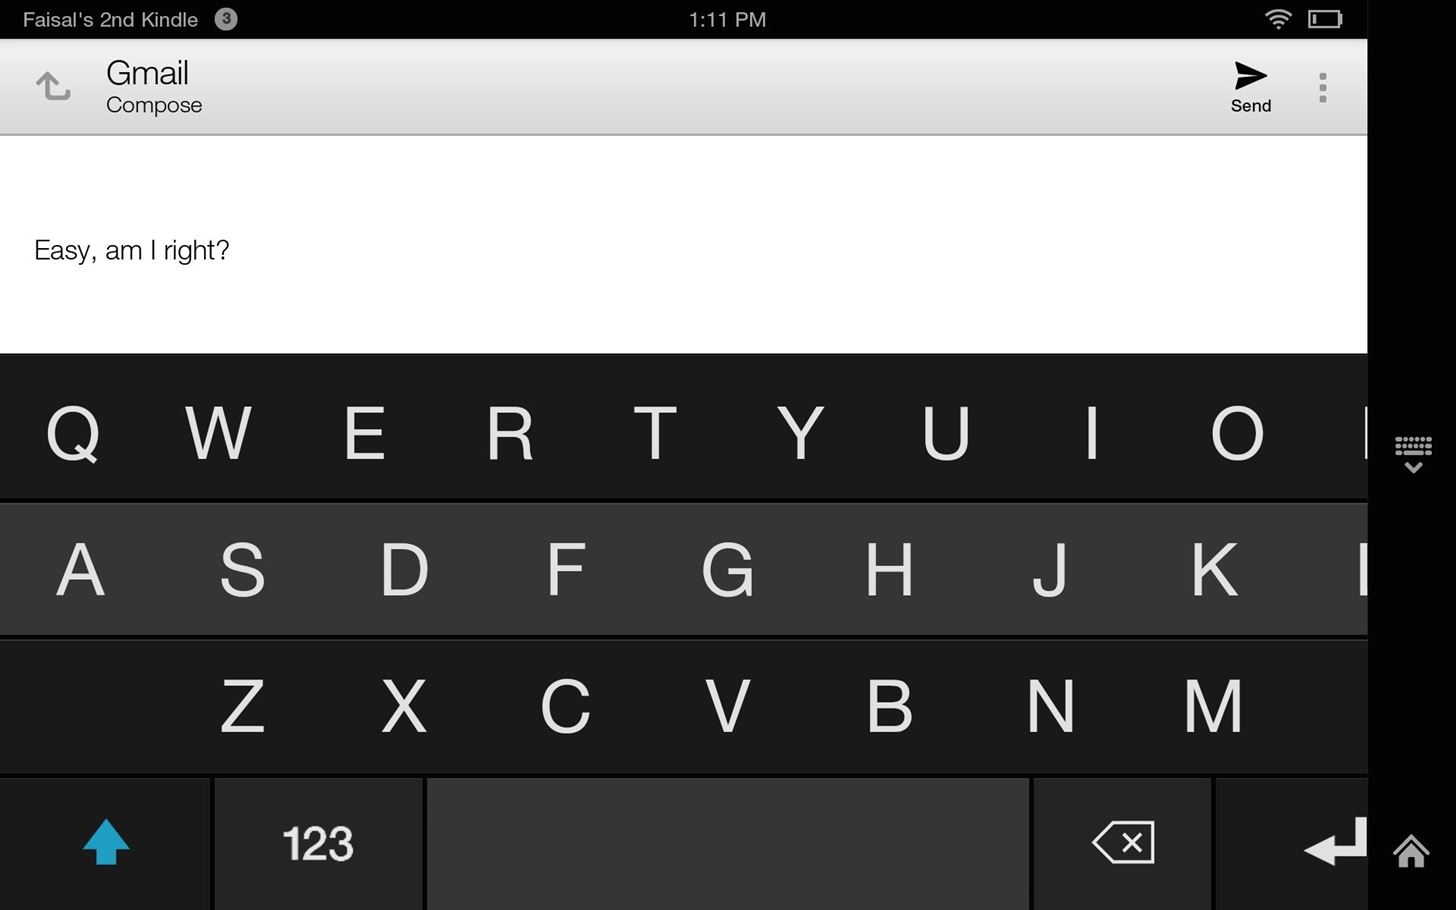 How to Install a Third-Party Keyboard on Your Amazon Kindle Fire HDX